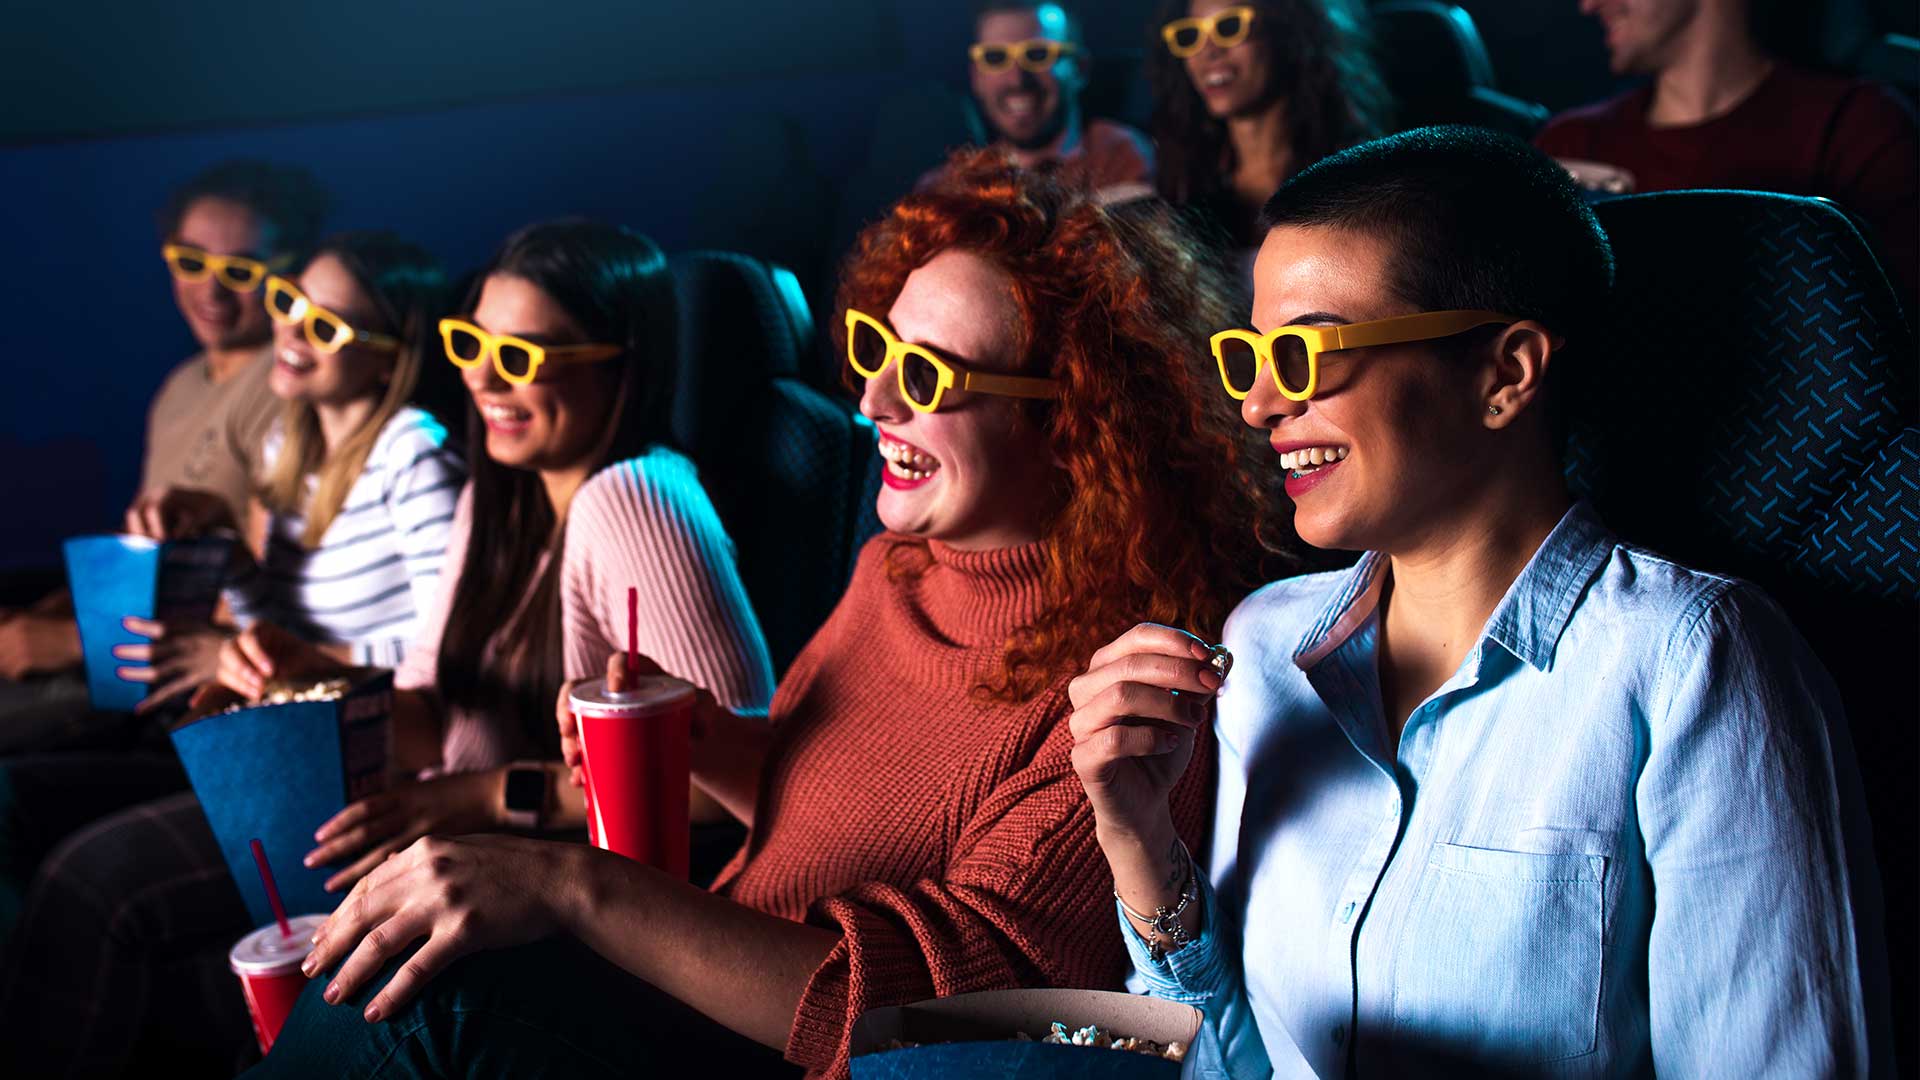 Why did 3D movies go away?